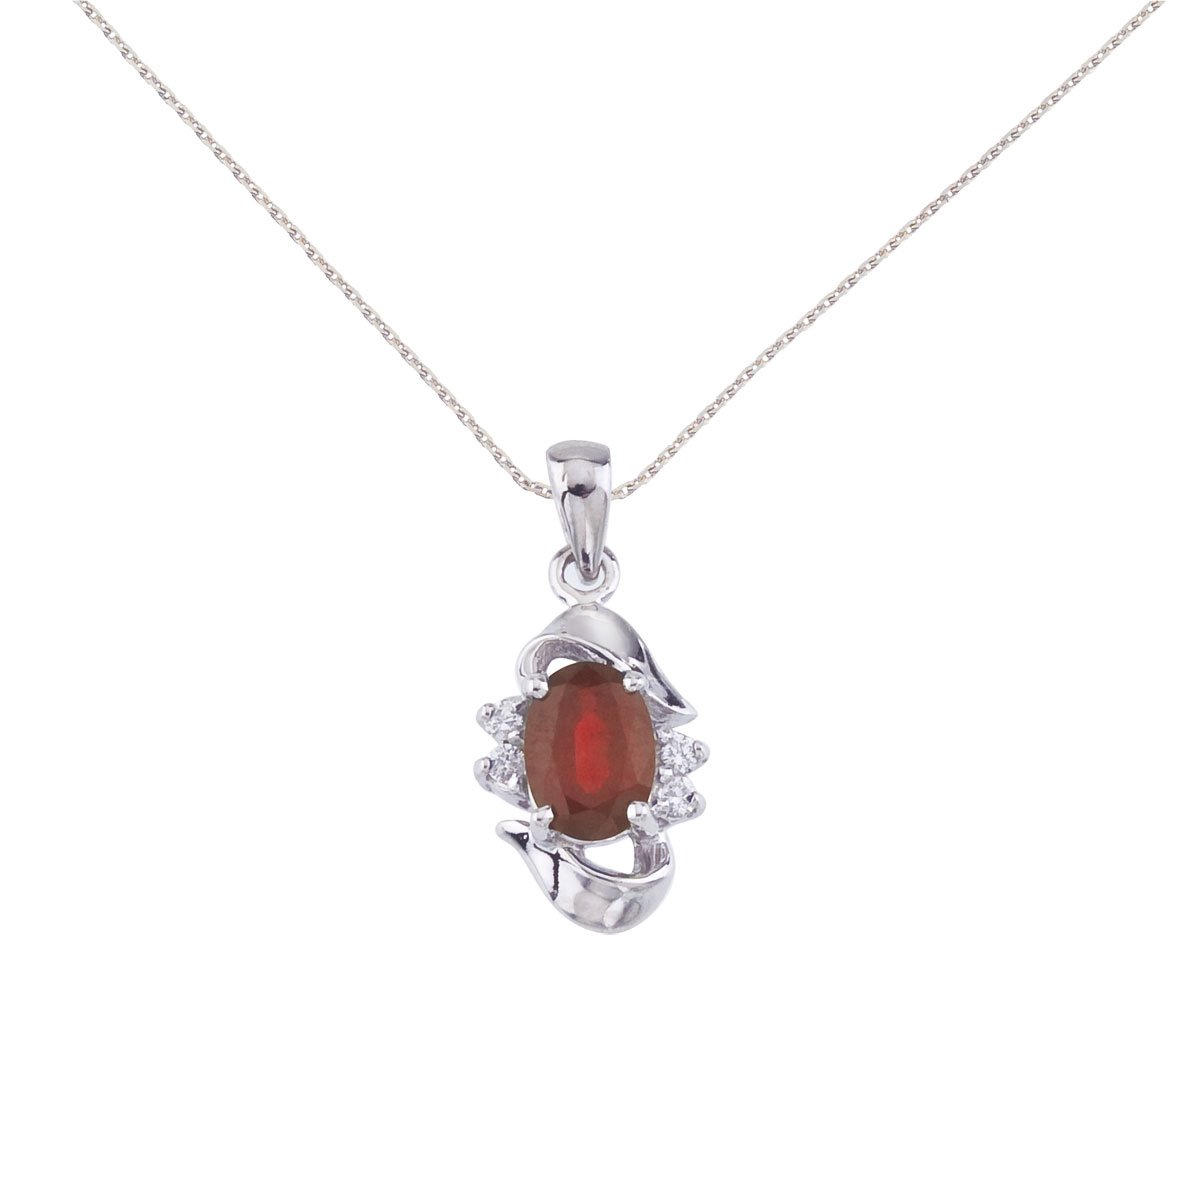 JCX2727: Add a hint of red to your look with this 14k white gold rbuy pendant. Featuring a genuine 7x5 mm ruby surrounded by .06 carats of sparkling diamonds.